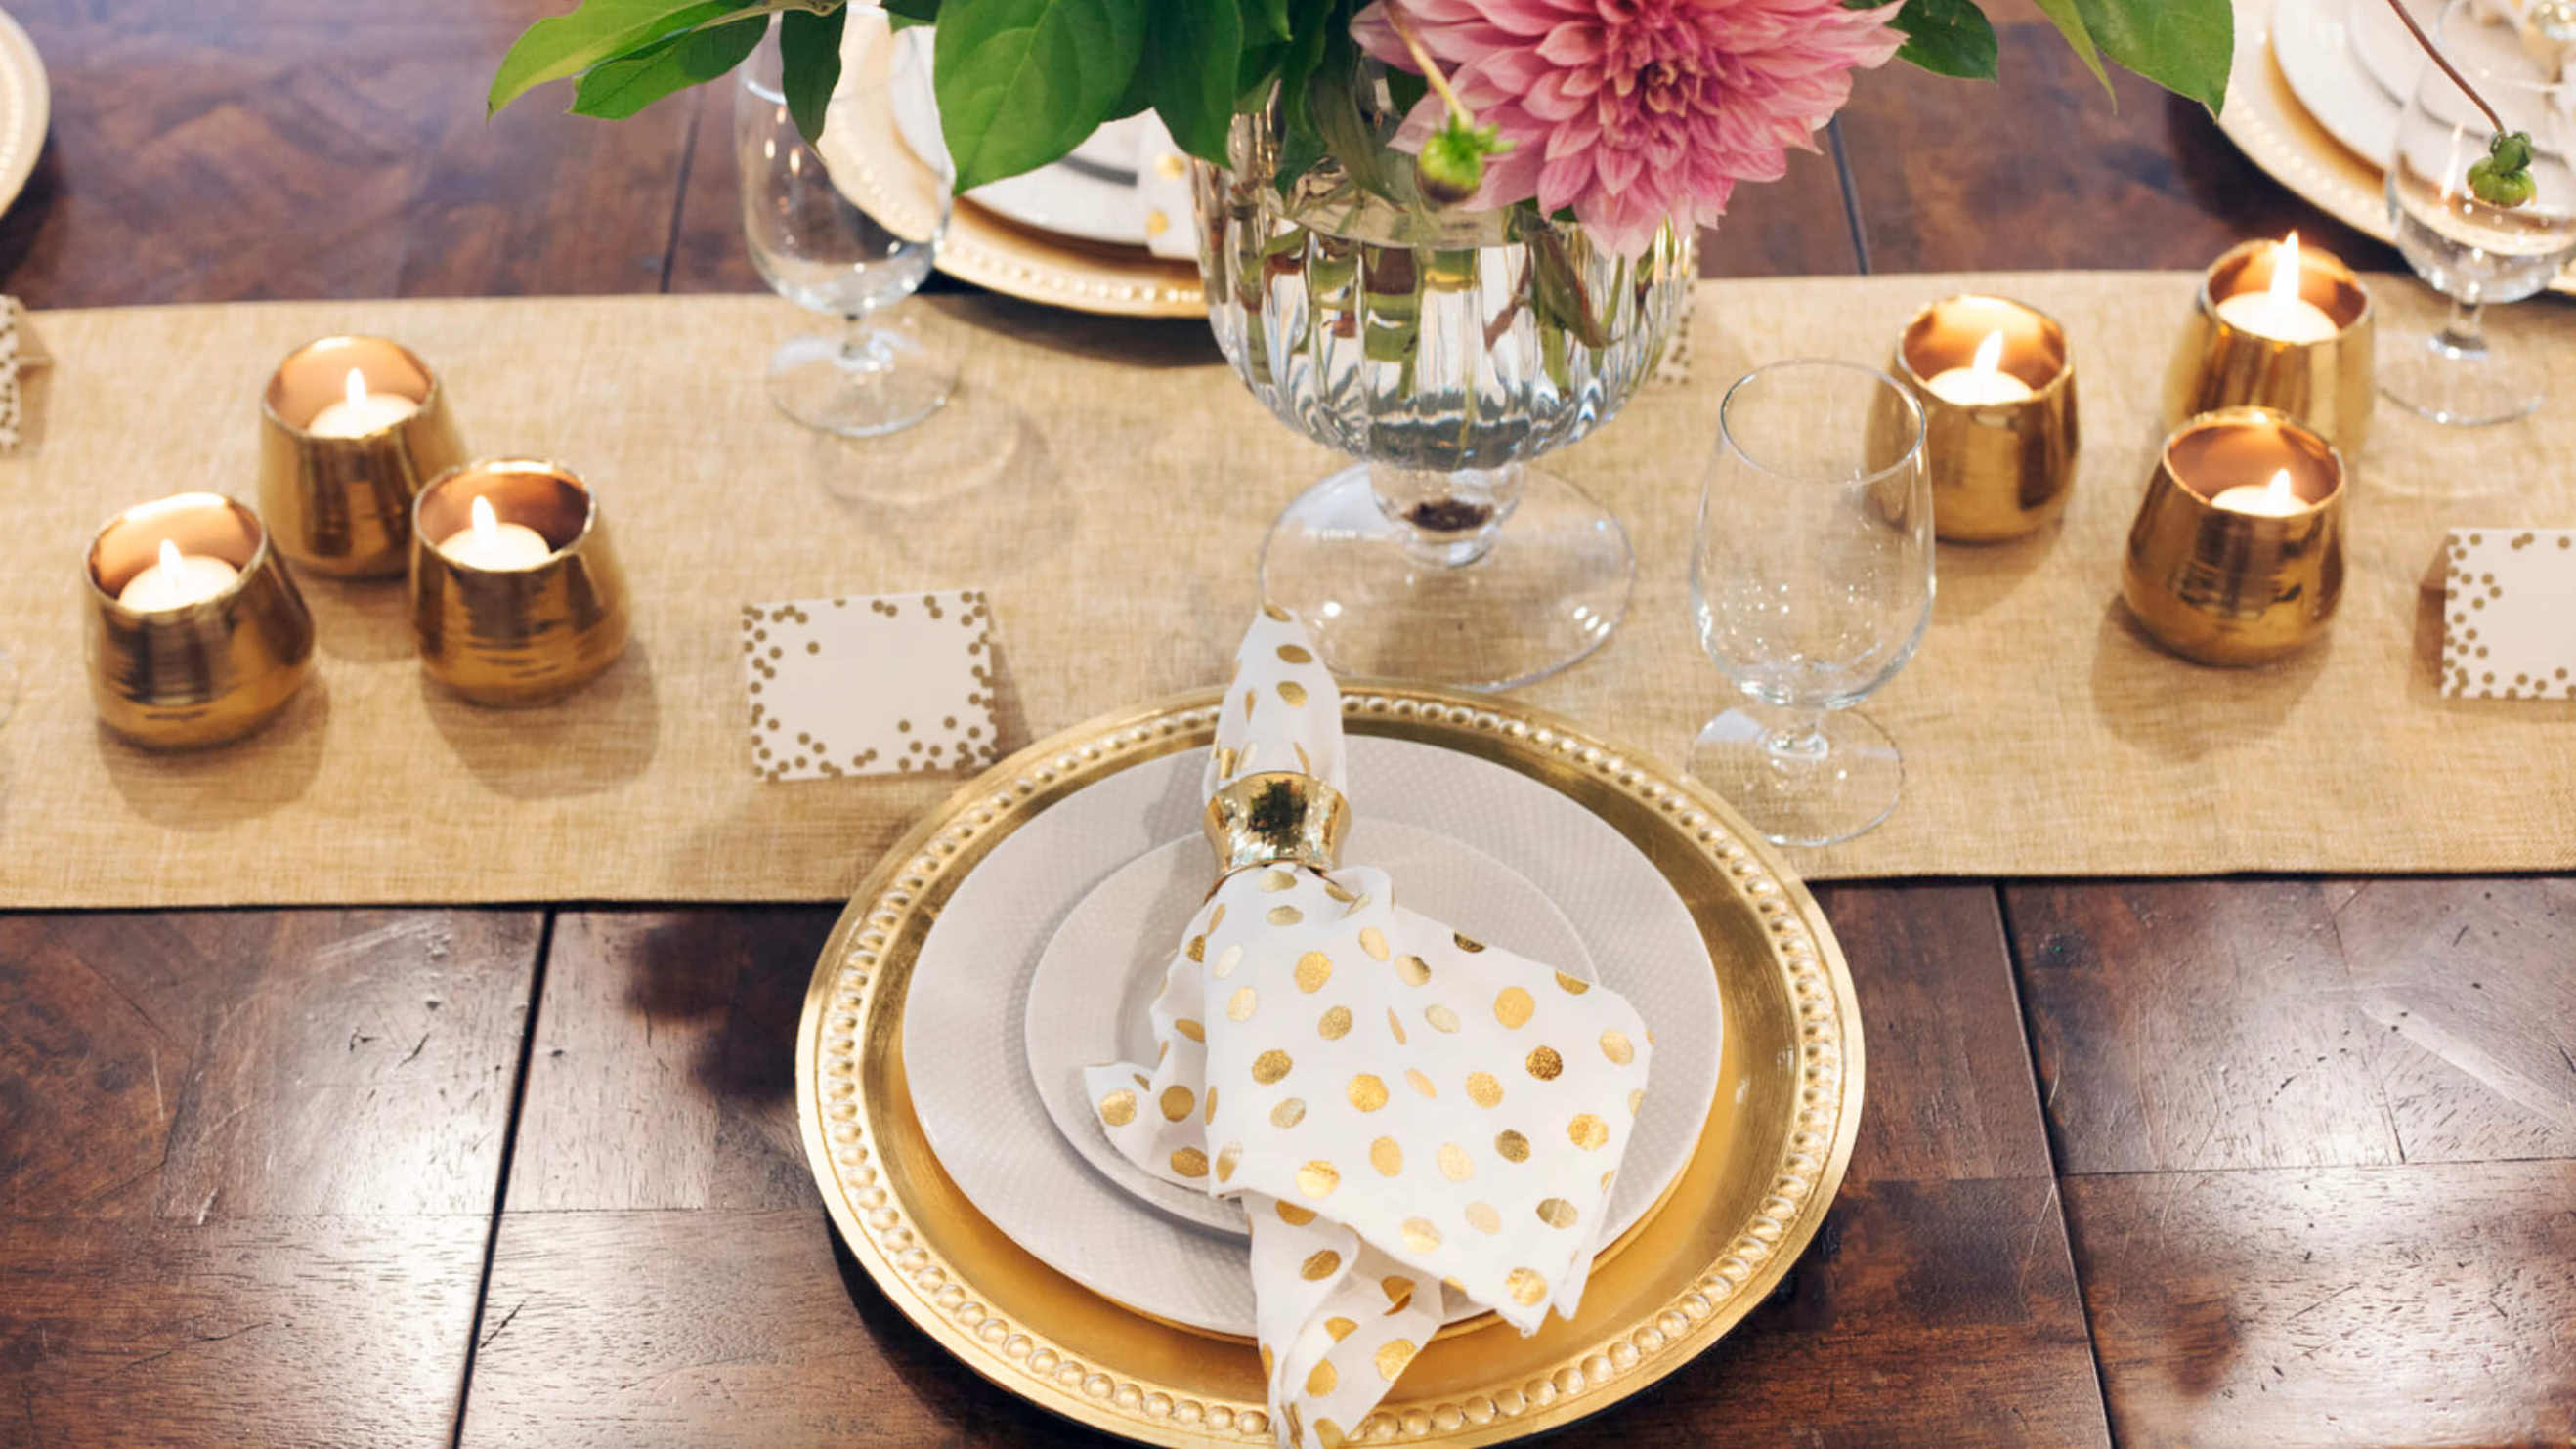 LUXURY AND STYLISH TABLETOP RENTALS